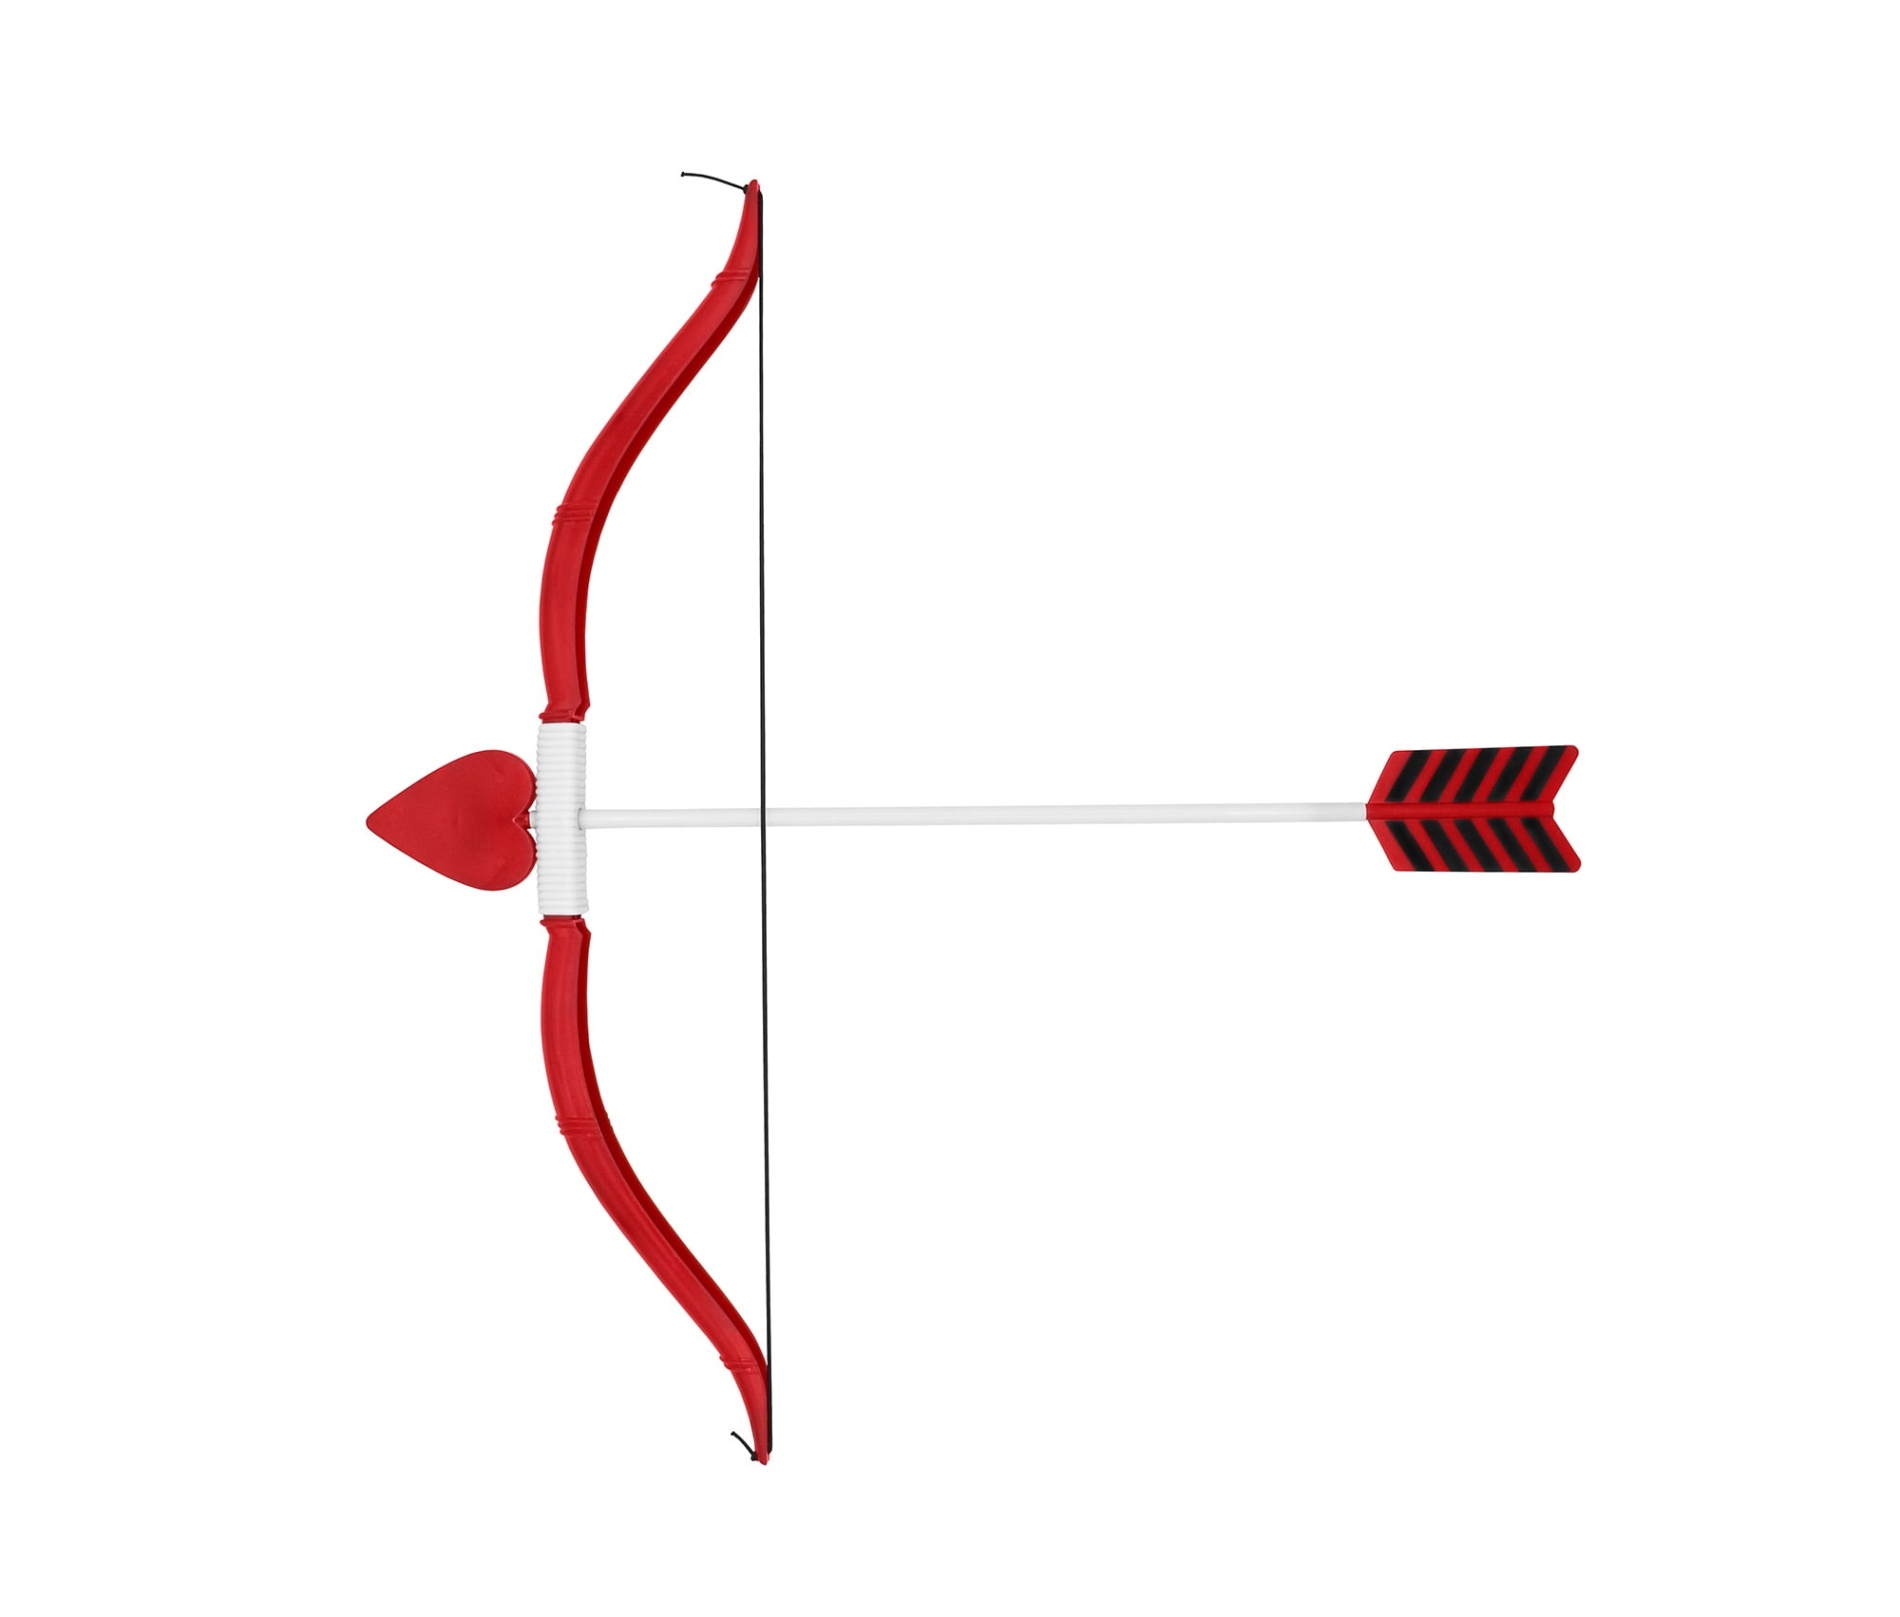 bow arrow accessories Bulan 5 Nicky Bigs Novelties Unisex Red and White Cupid Bow and Arrow Set - Plastic  Heart Arrow Handheld Accessories - Valentines Halloween Costume Prop, Red,